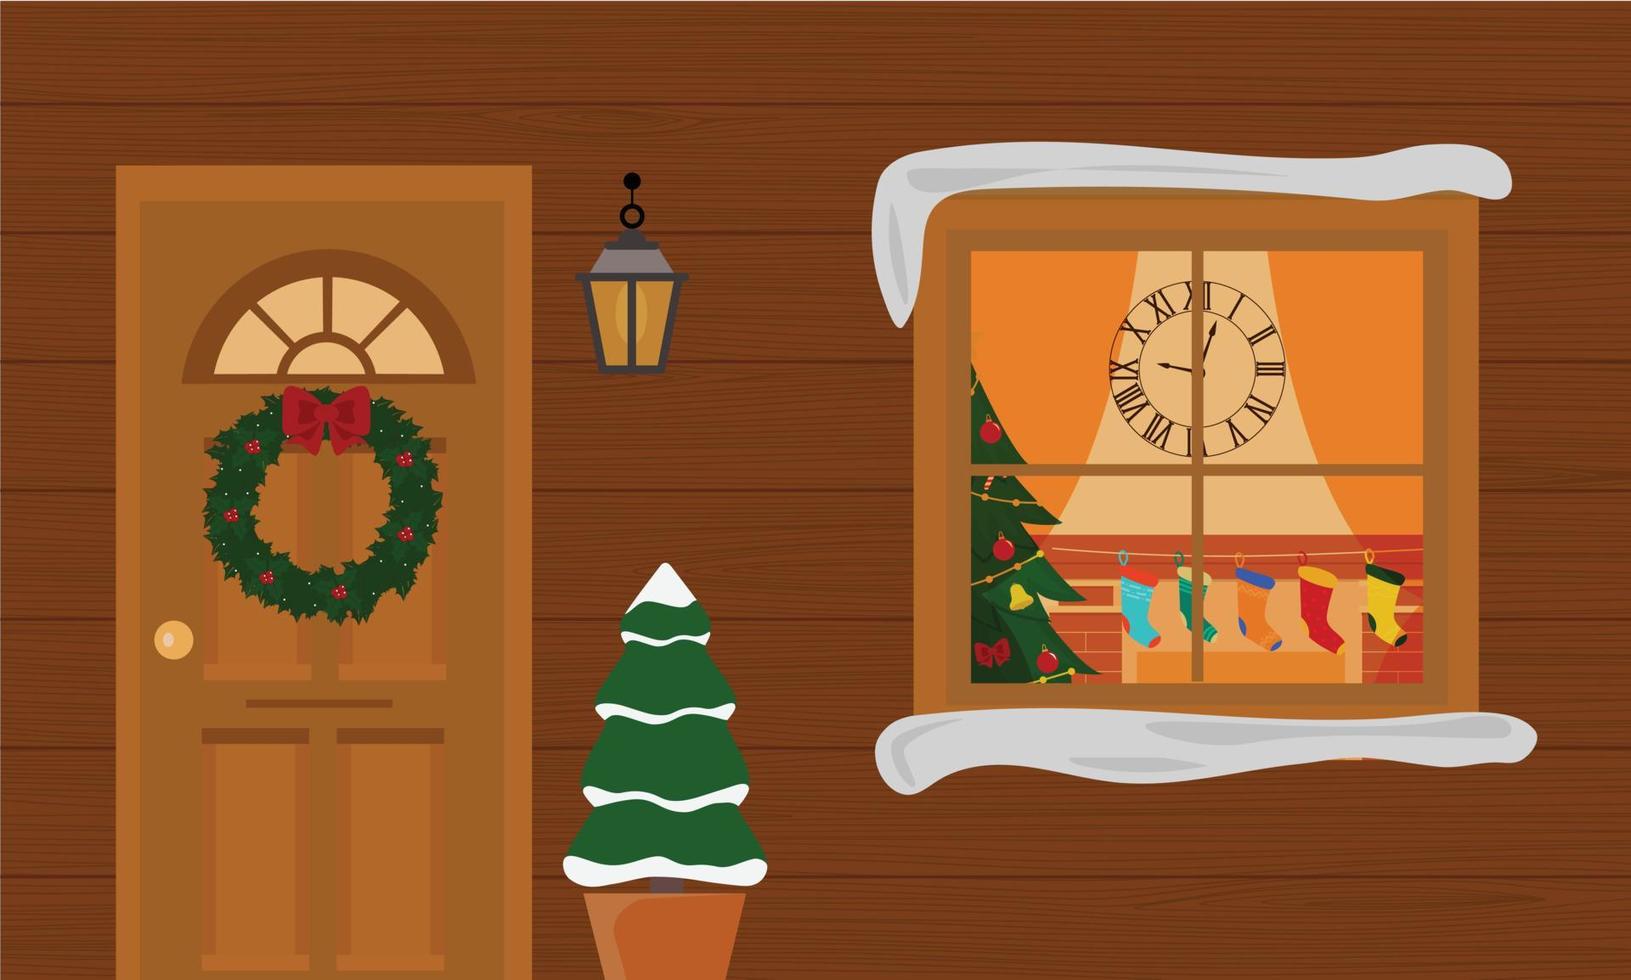 Christmas house with decoration porch with little trees and lanterns. Window with Christmas living room xmas tree, lights, presents, fireplace. vector